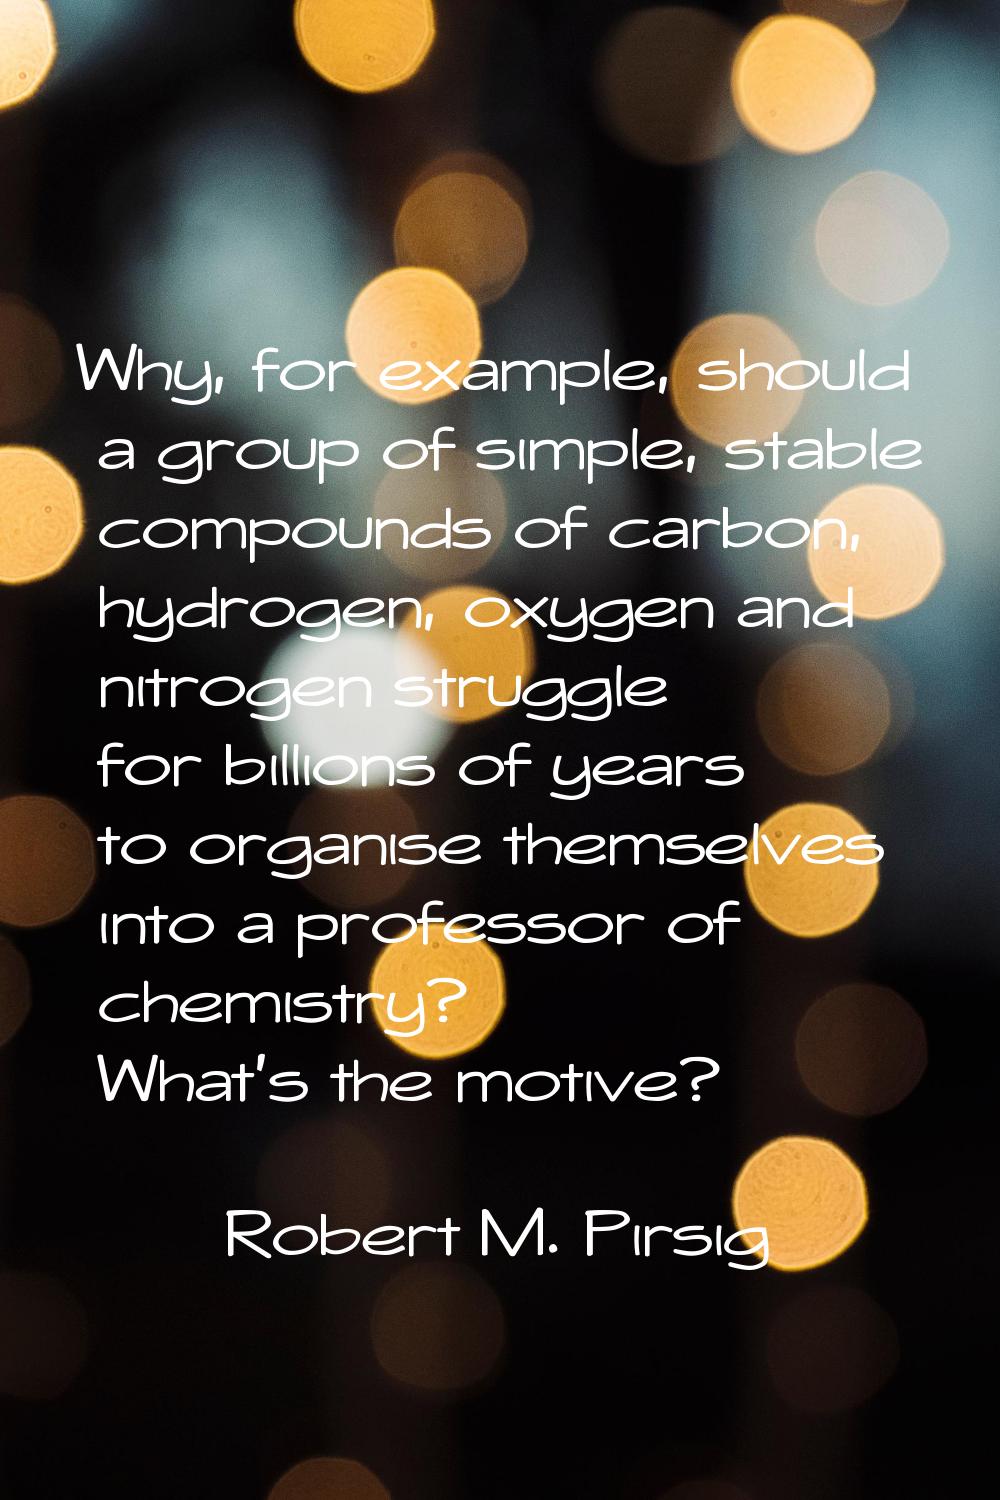 Why, for example, should a group of simple, stable compounds of carbon, hydrogen, oxygen and nitrog